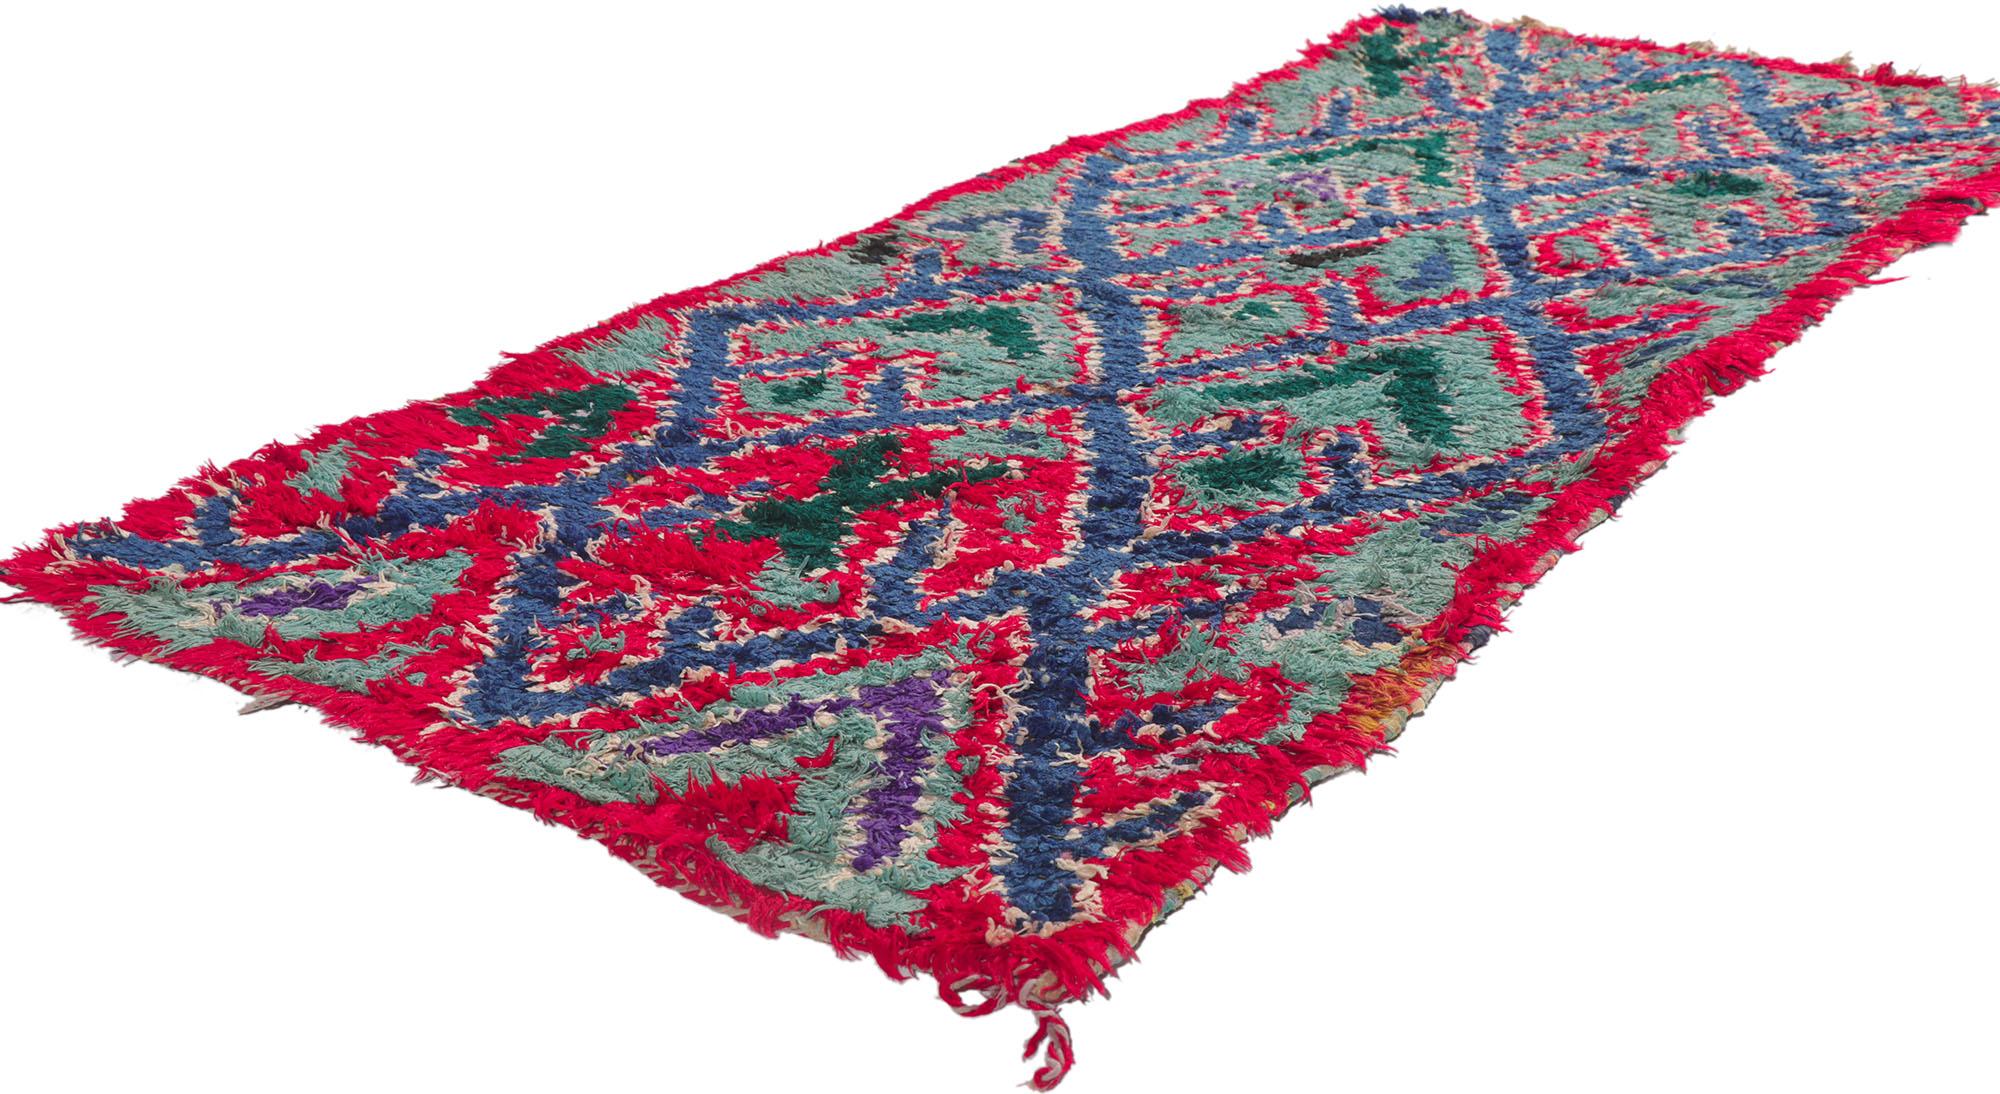 21621 Vintage Boucherouite Moroccan Rag Rug, 02'05 x 05'06. 
Step into a world of tribal enchantment and boho chic flair with this hand knotted vintage Boucherouite Moroccan rag rug. Every inch is a woven masterpiece, with a striking diamond trellis